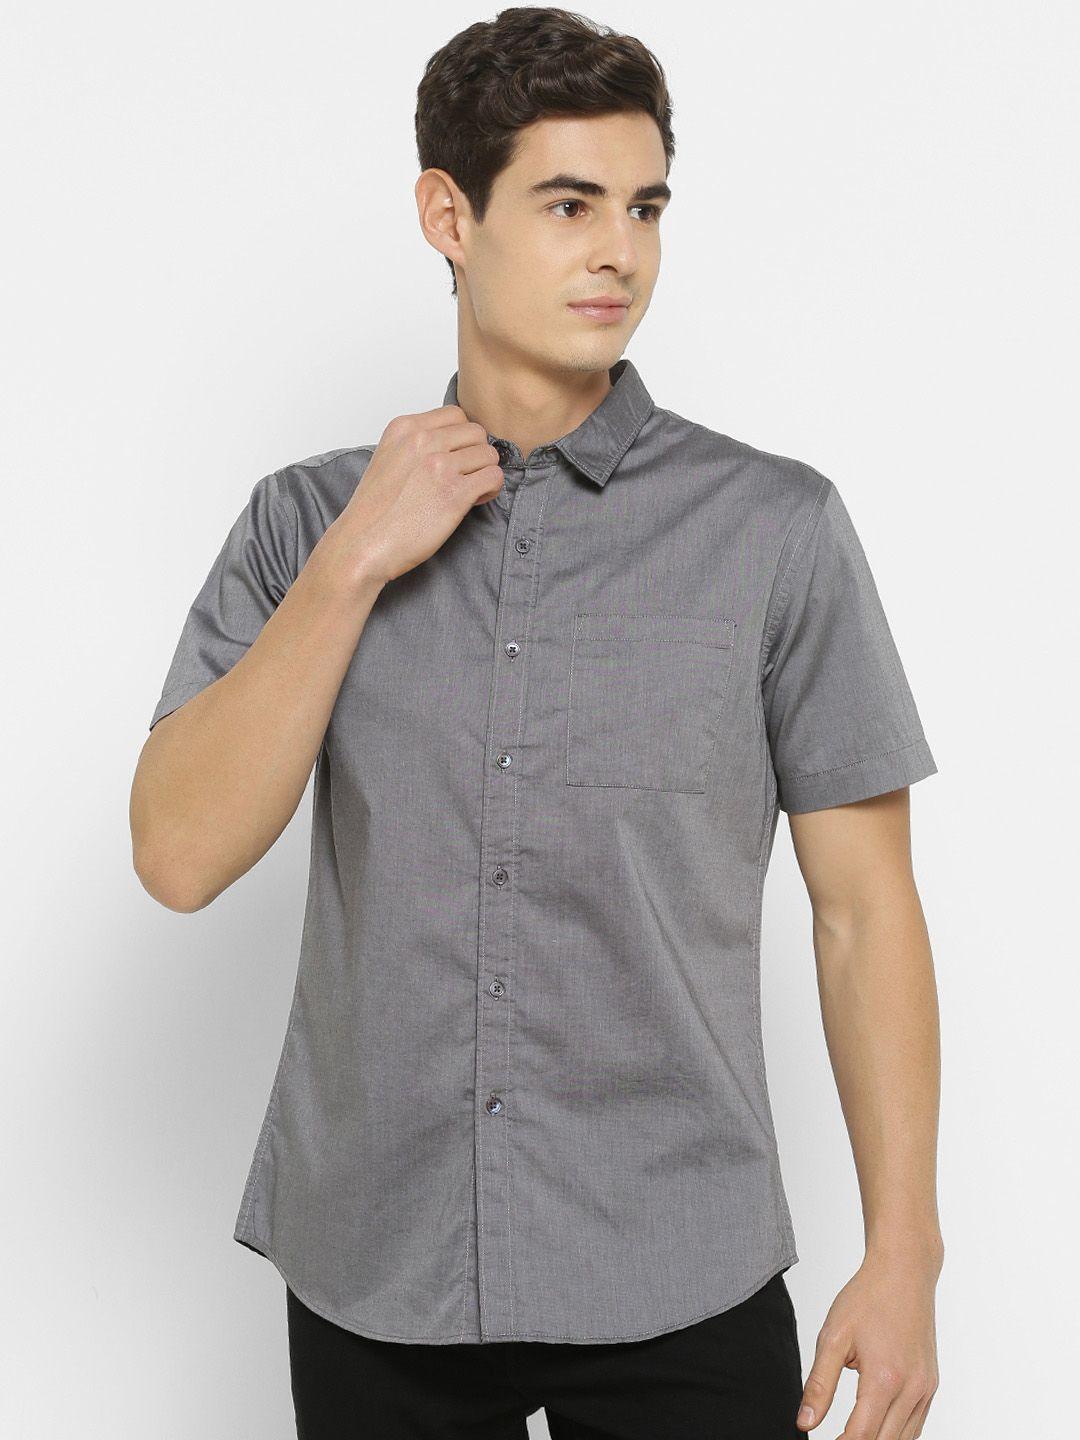 forever-21-men-grey-slim-fit-solid-casual-shirt